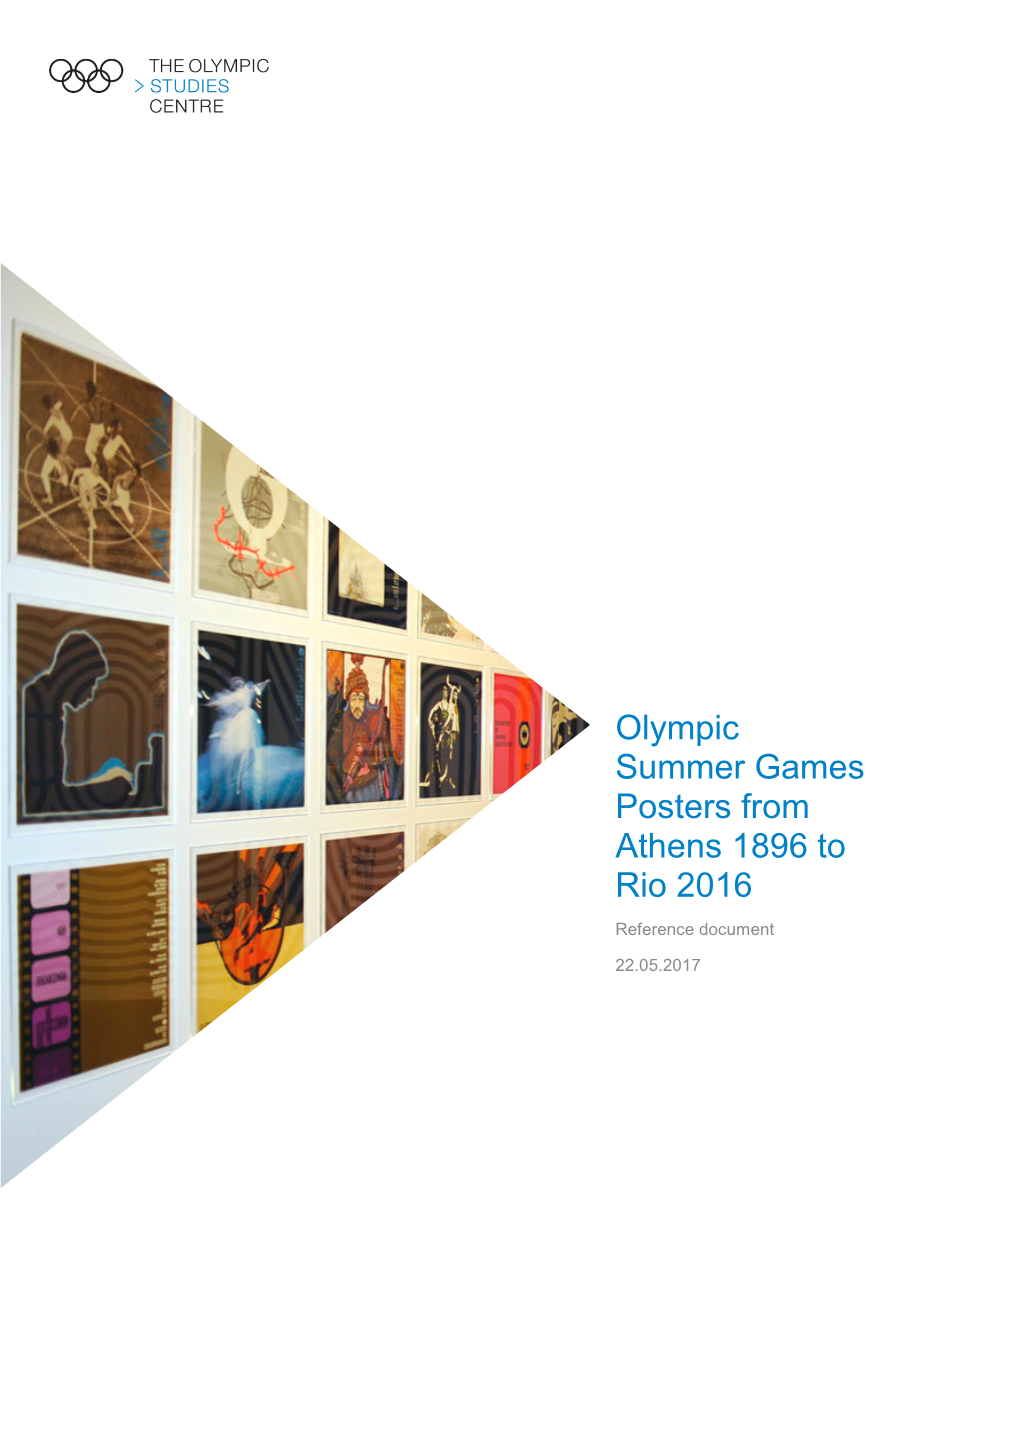 Olympic Summer Games Posters from Athens 1896 to Rio 2016 Reference Document